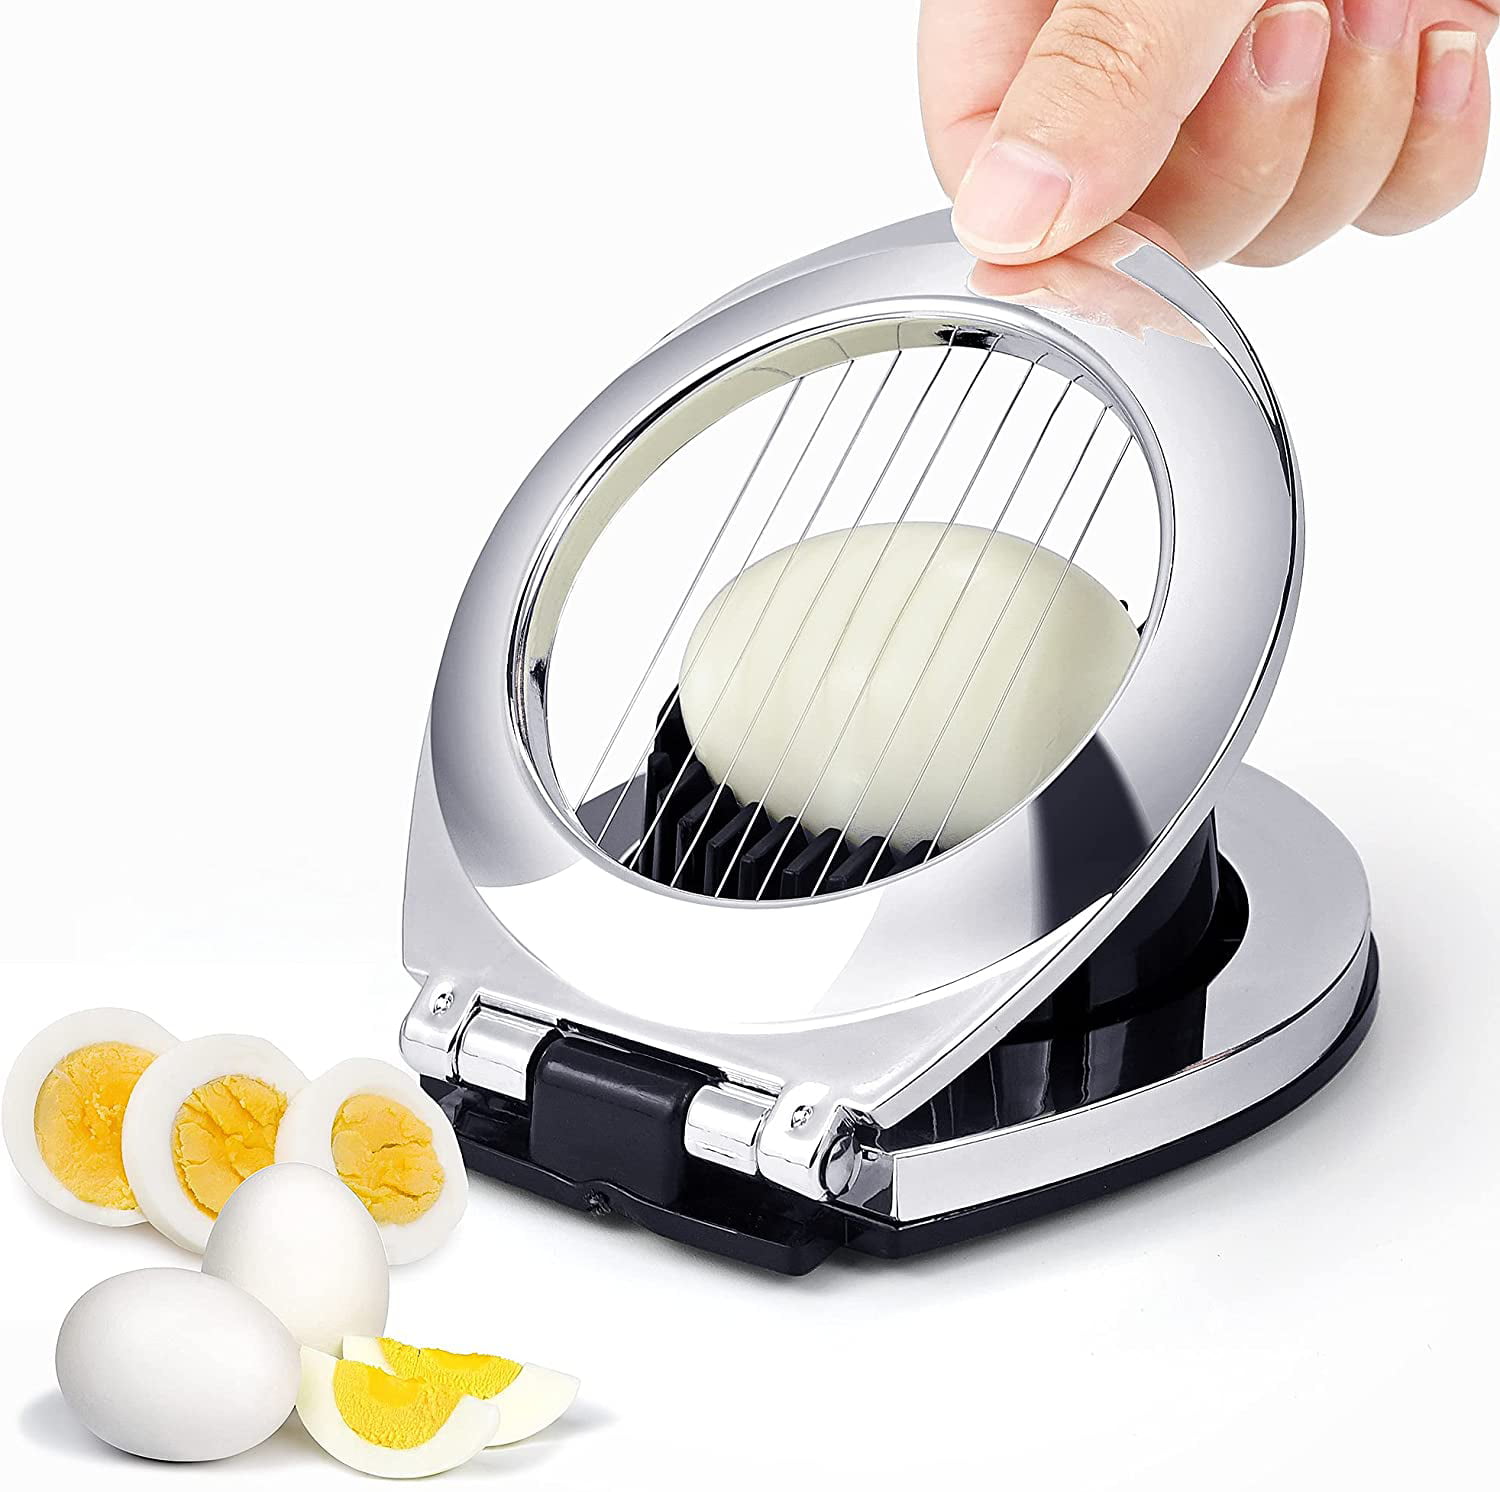 3 In 1 Egg Cutter Egg Slicer Egg Tools Kitchen Accessories Cooking Tools M CA